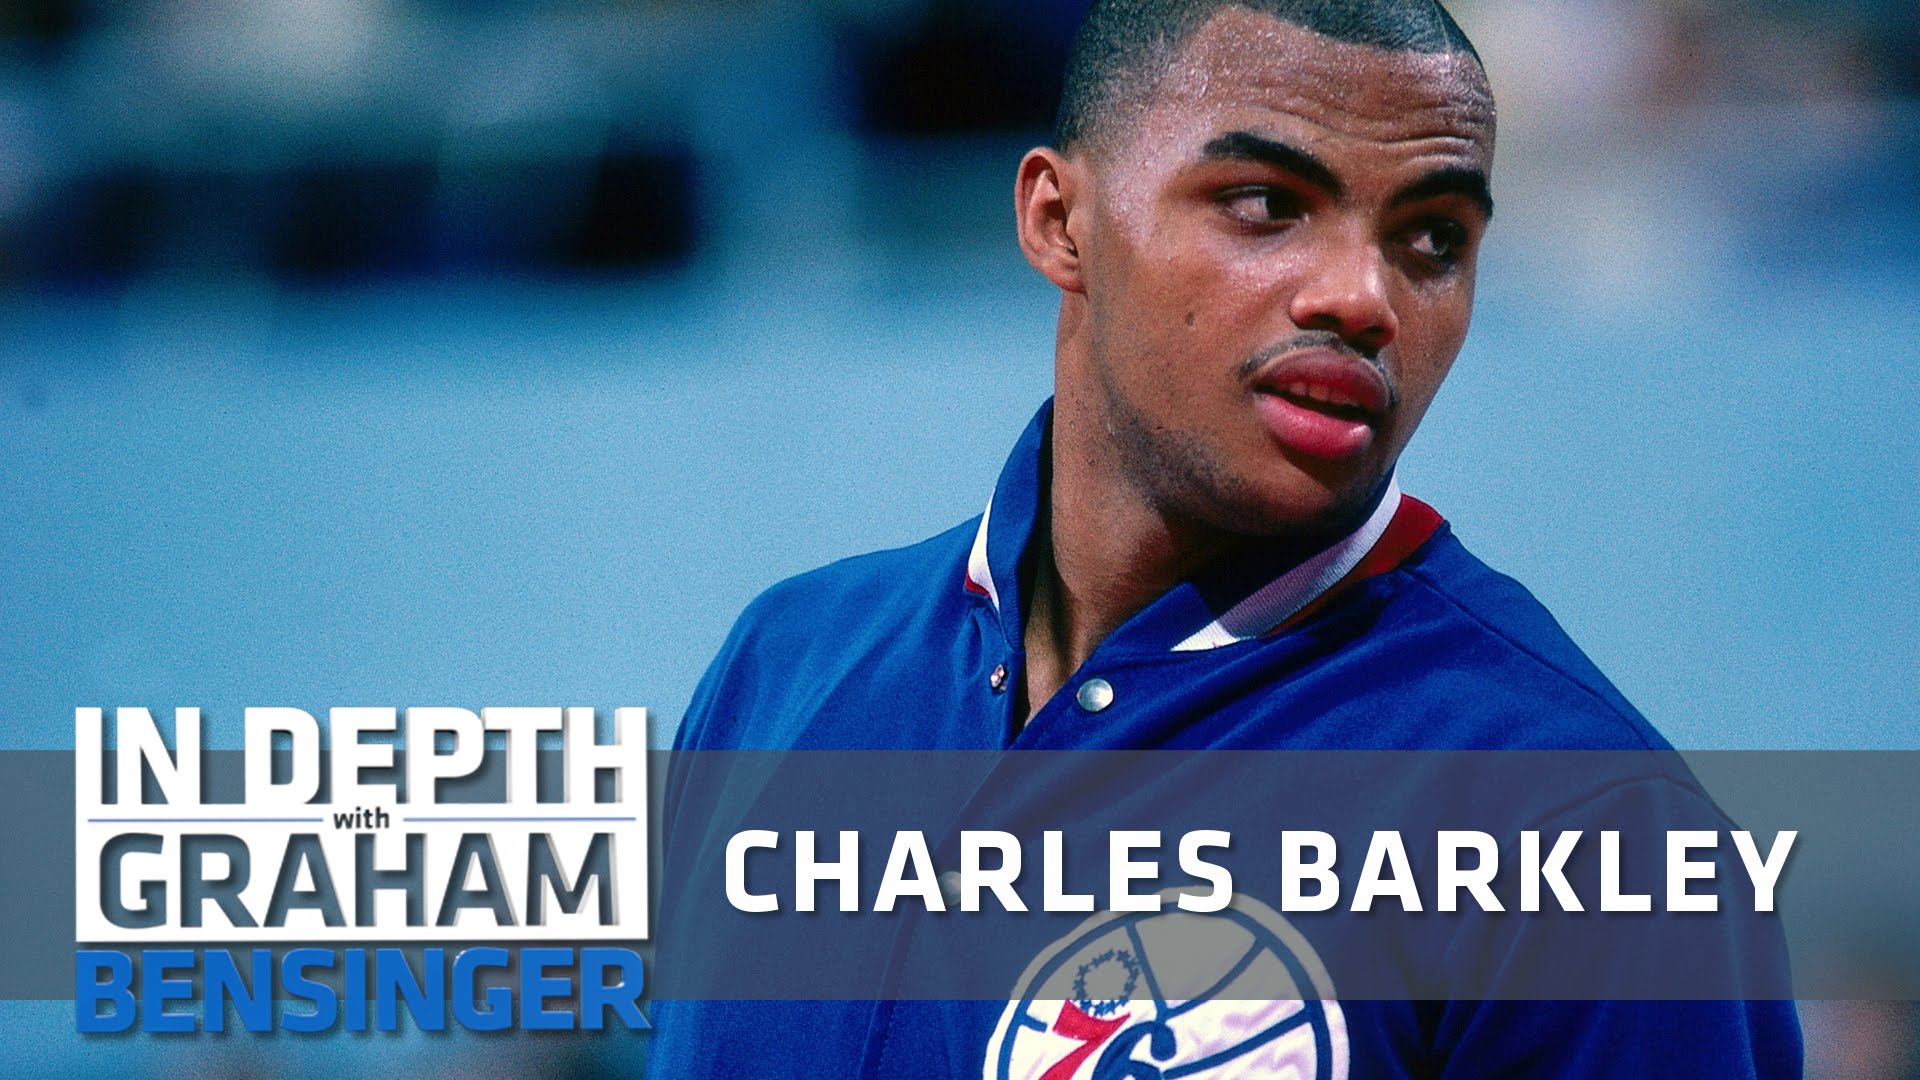 Charles Barkley says he got really fat so the 76ers wouldn’t draft him